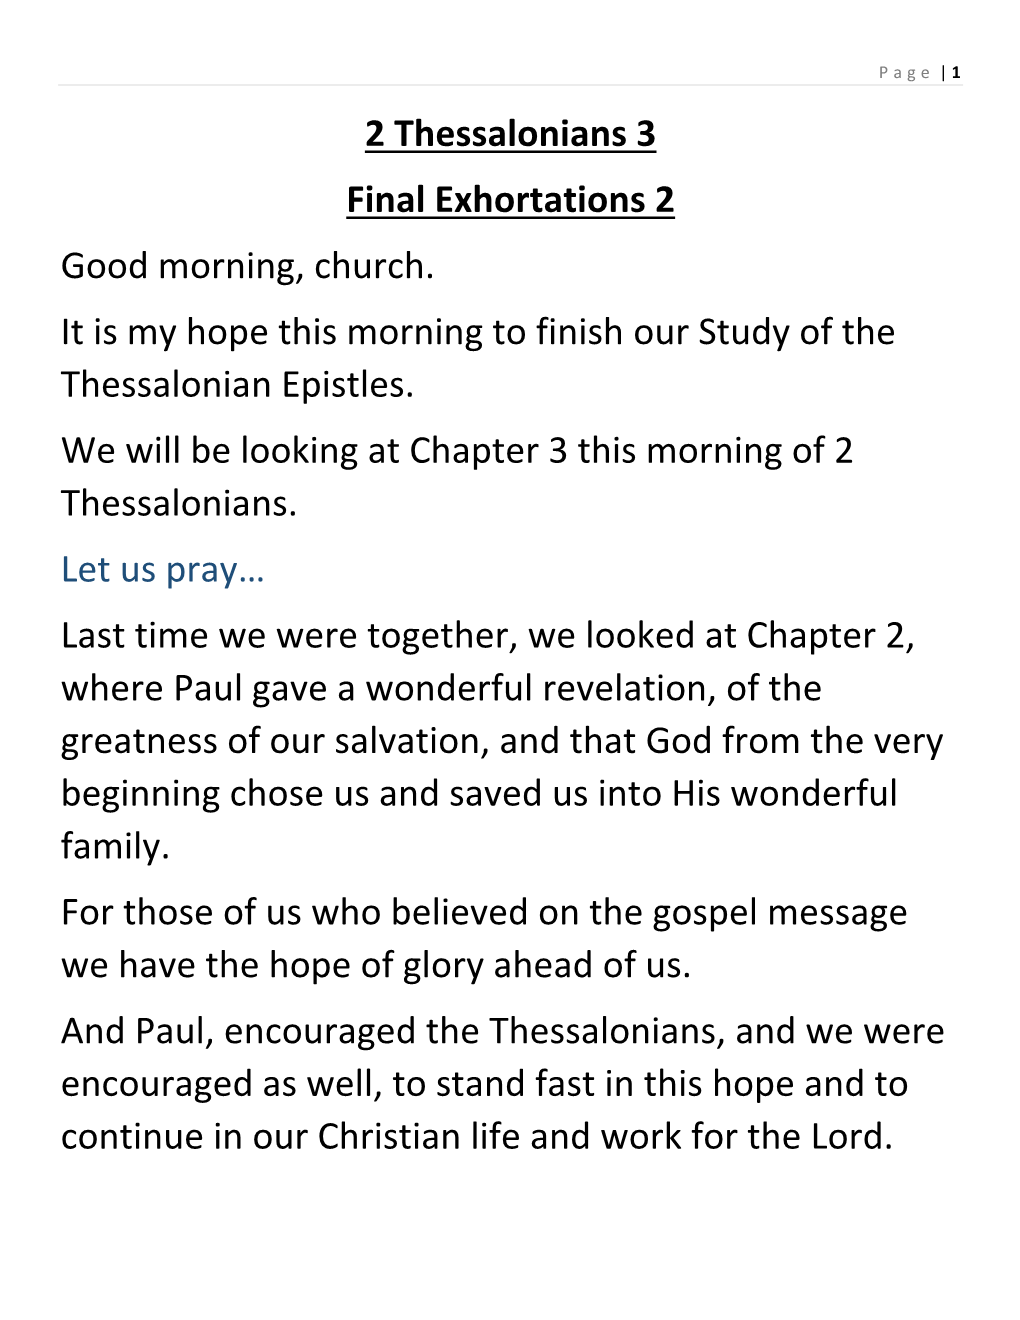 2 Thessalonians 3 Final Exhortations 2 Good Morning, Church. It Is My Hope This Morning to Finish Our Study of the Thessalonian Epistles